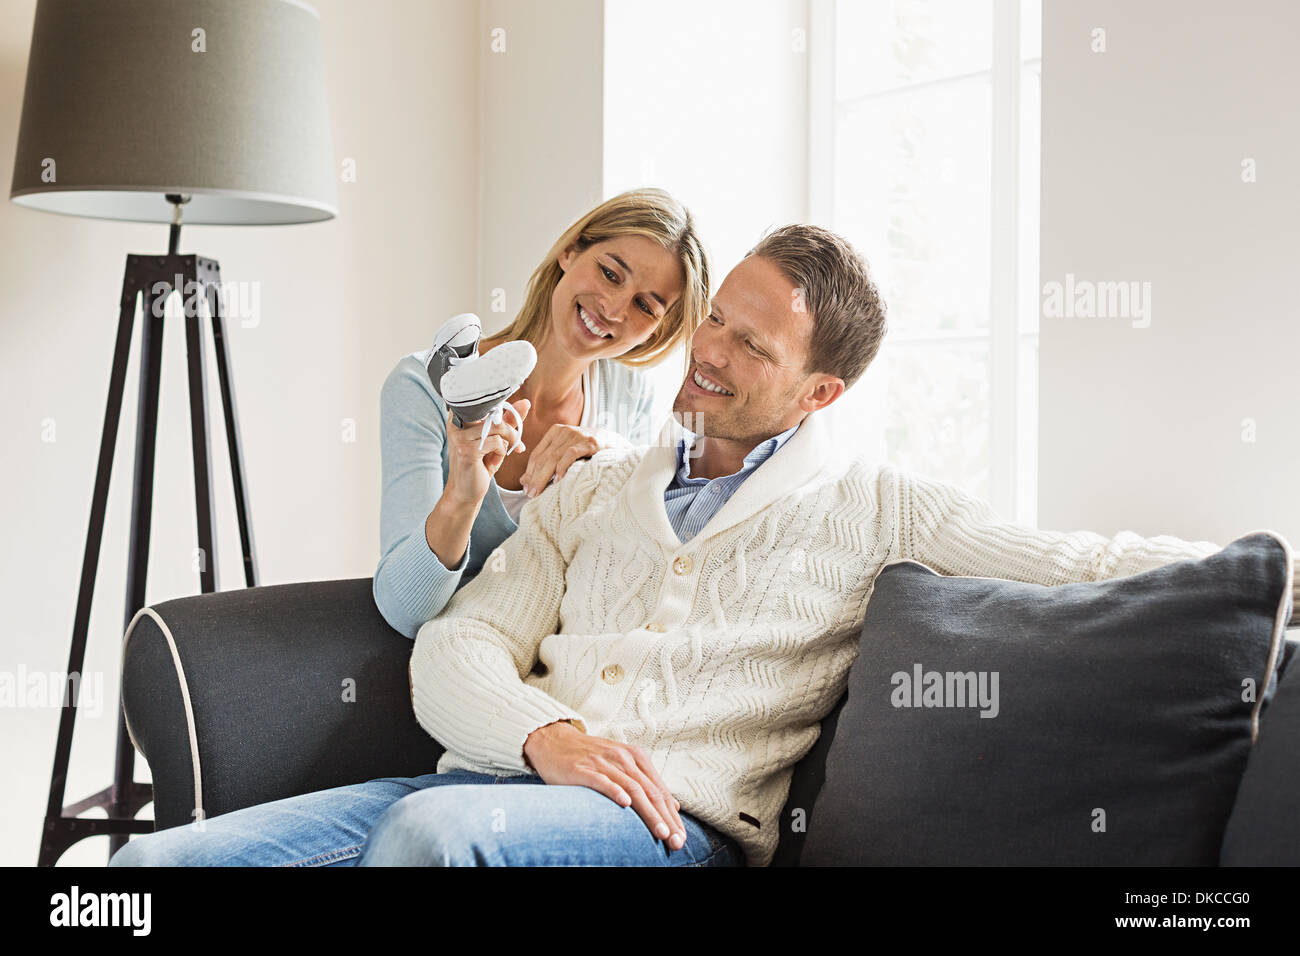 Couple, woman holding baby shoes Banque D'Images